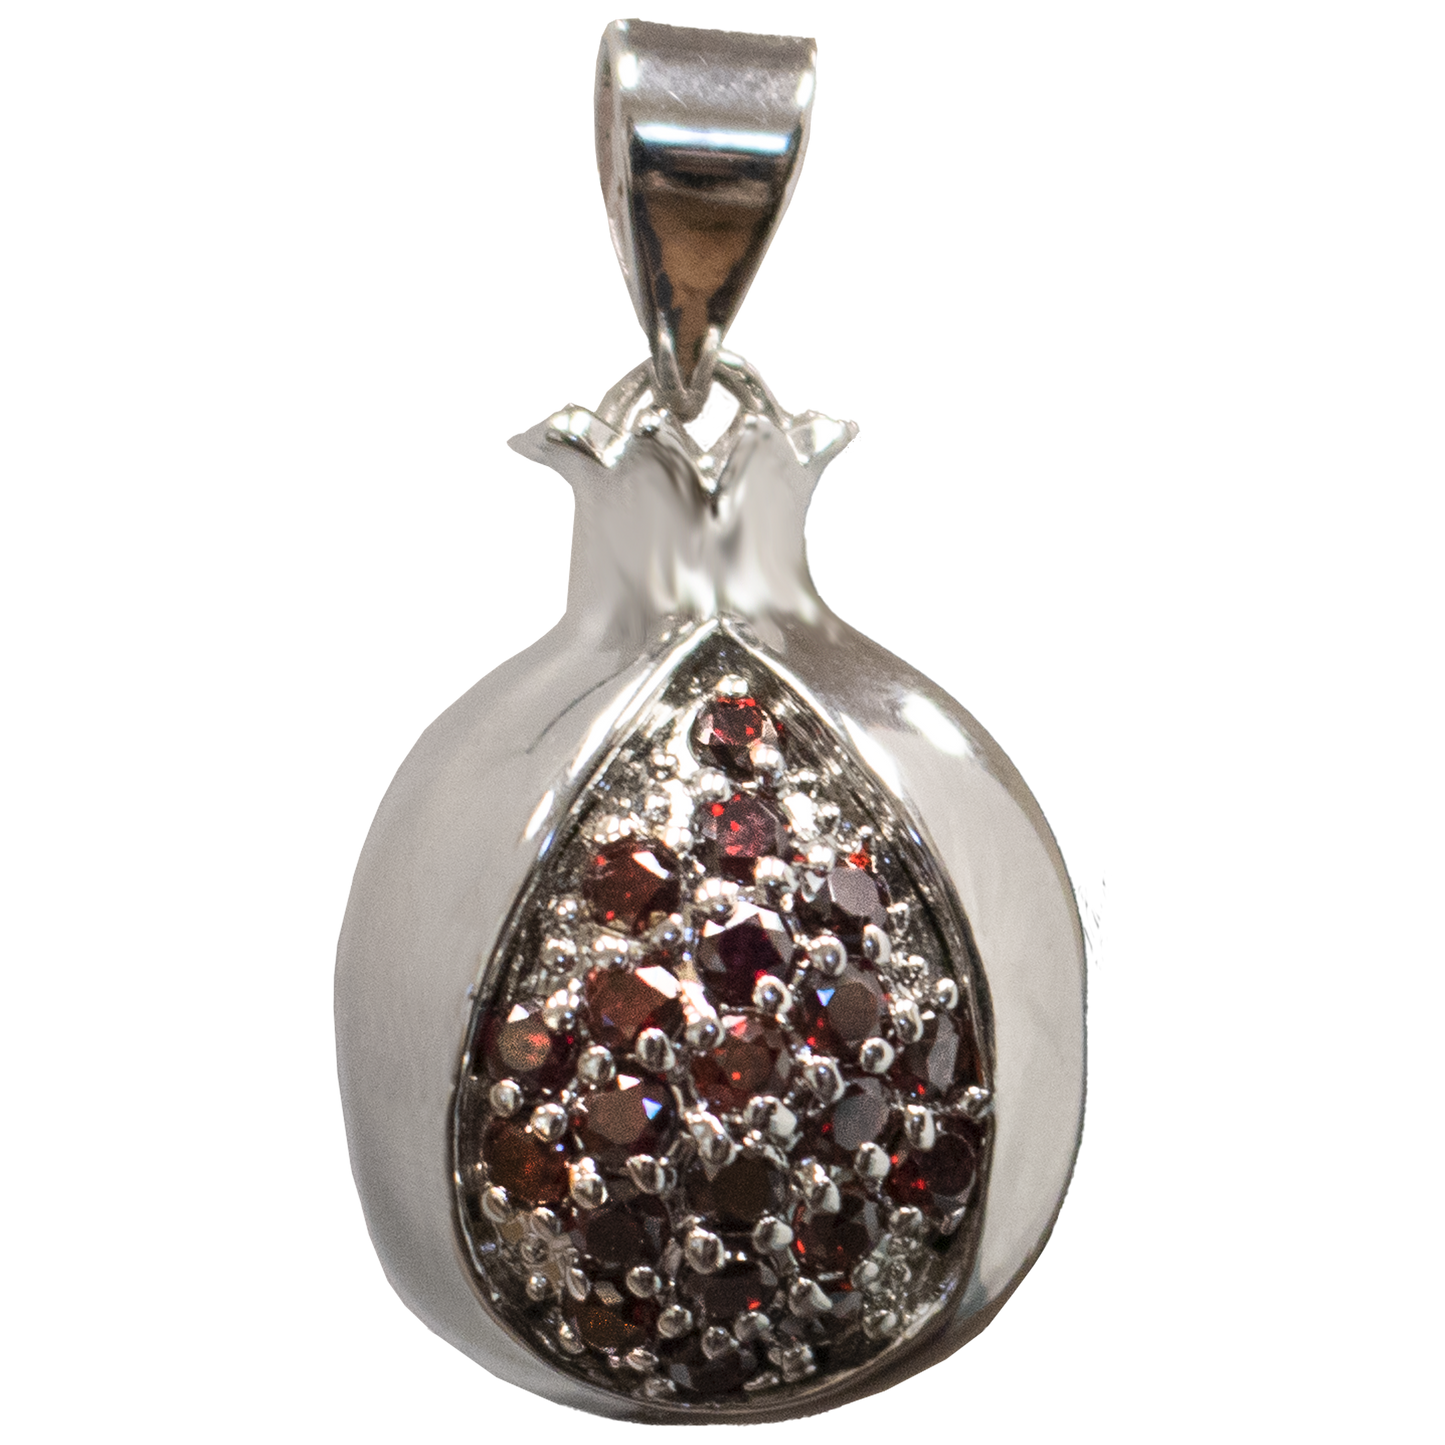 Silver-plated Pomegranate Pendant with Garnets